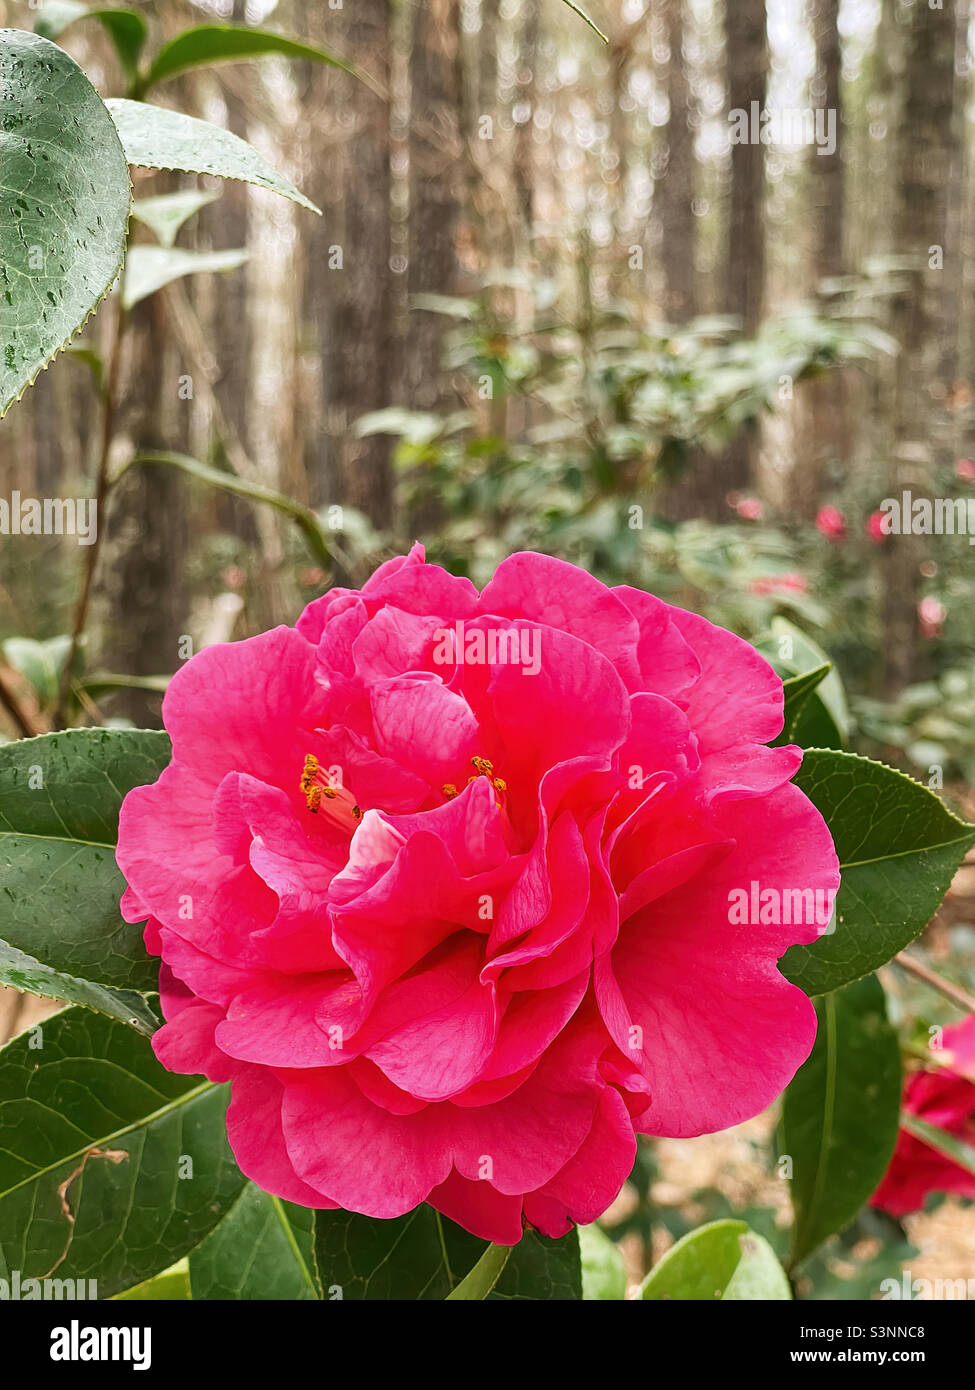 Sara Oliver camellia japonica in a natural outdoor environment. Copy space. Stock Photo